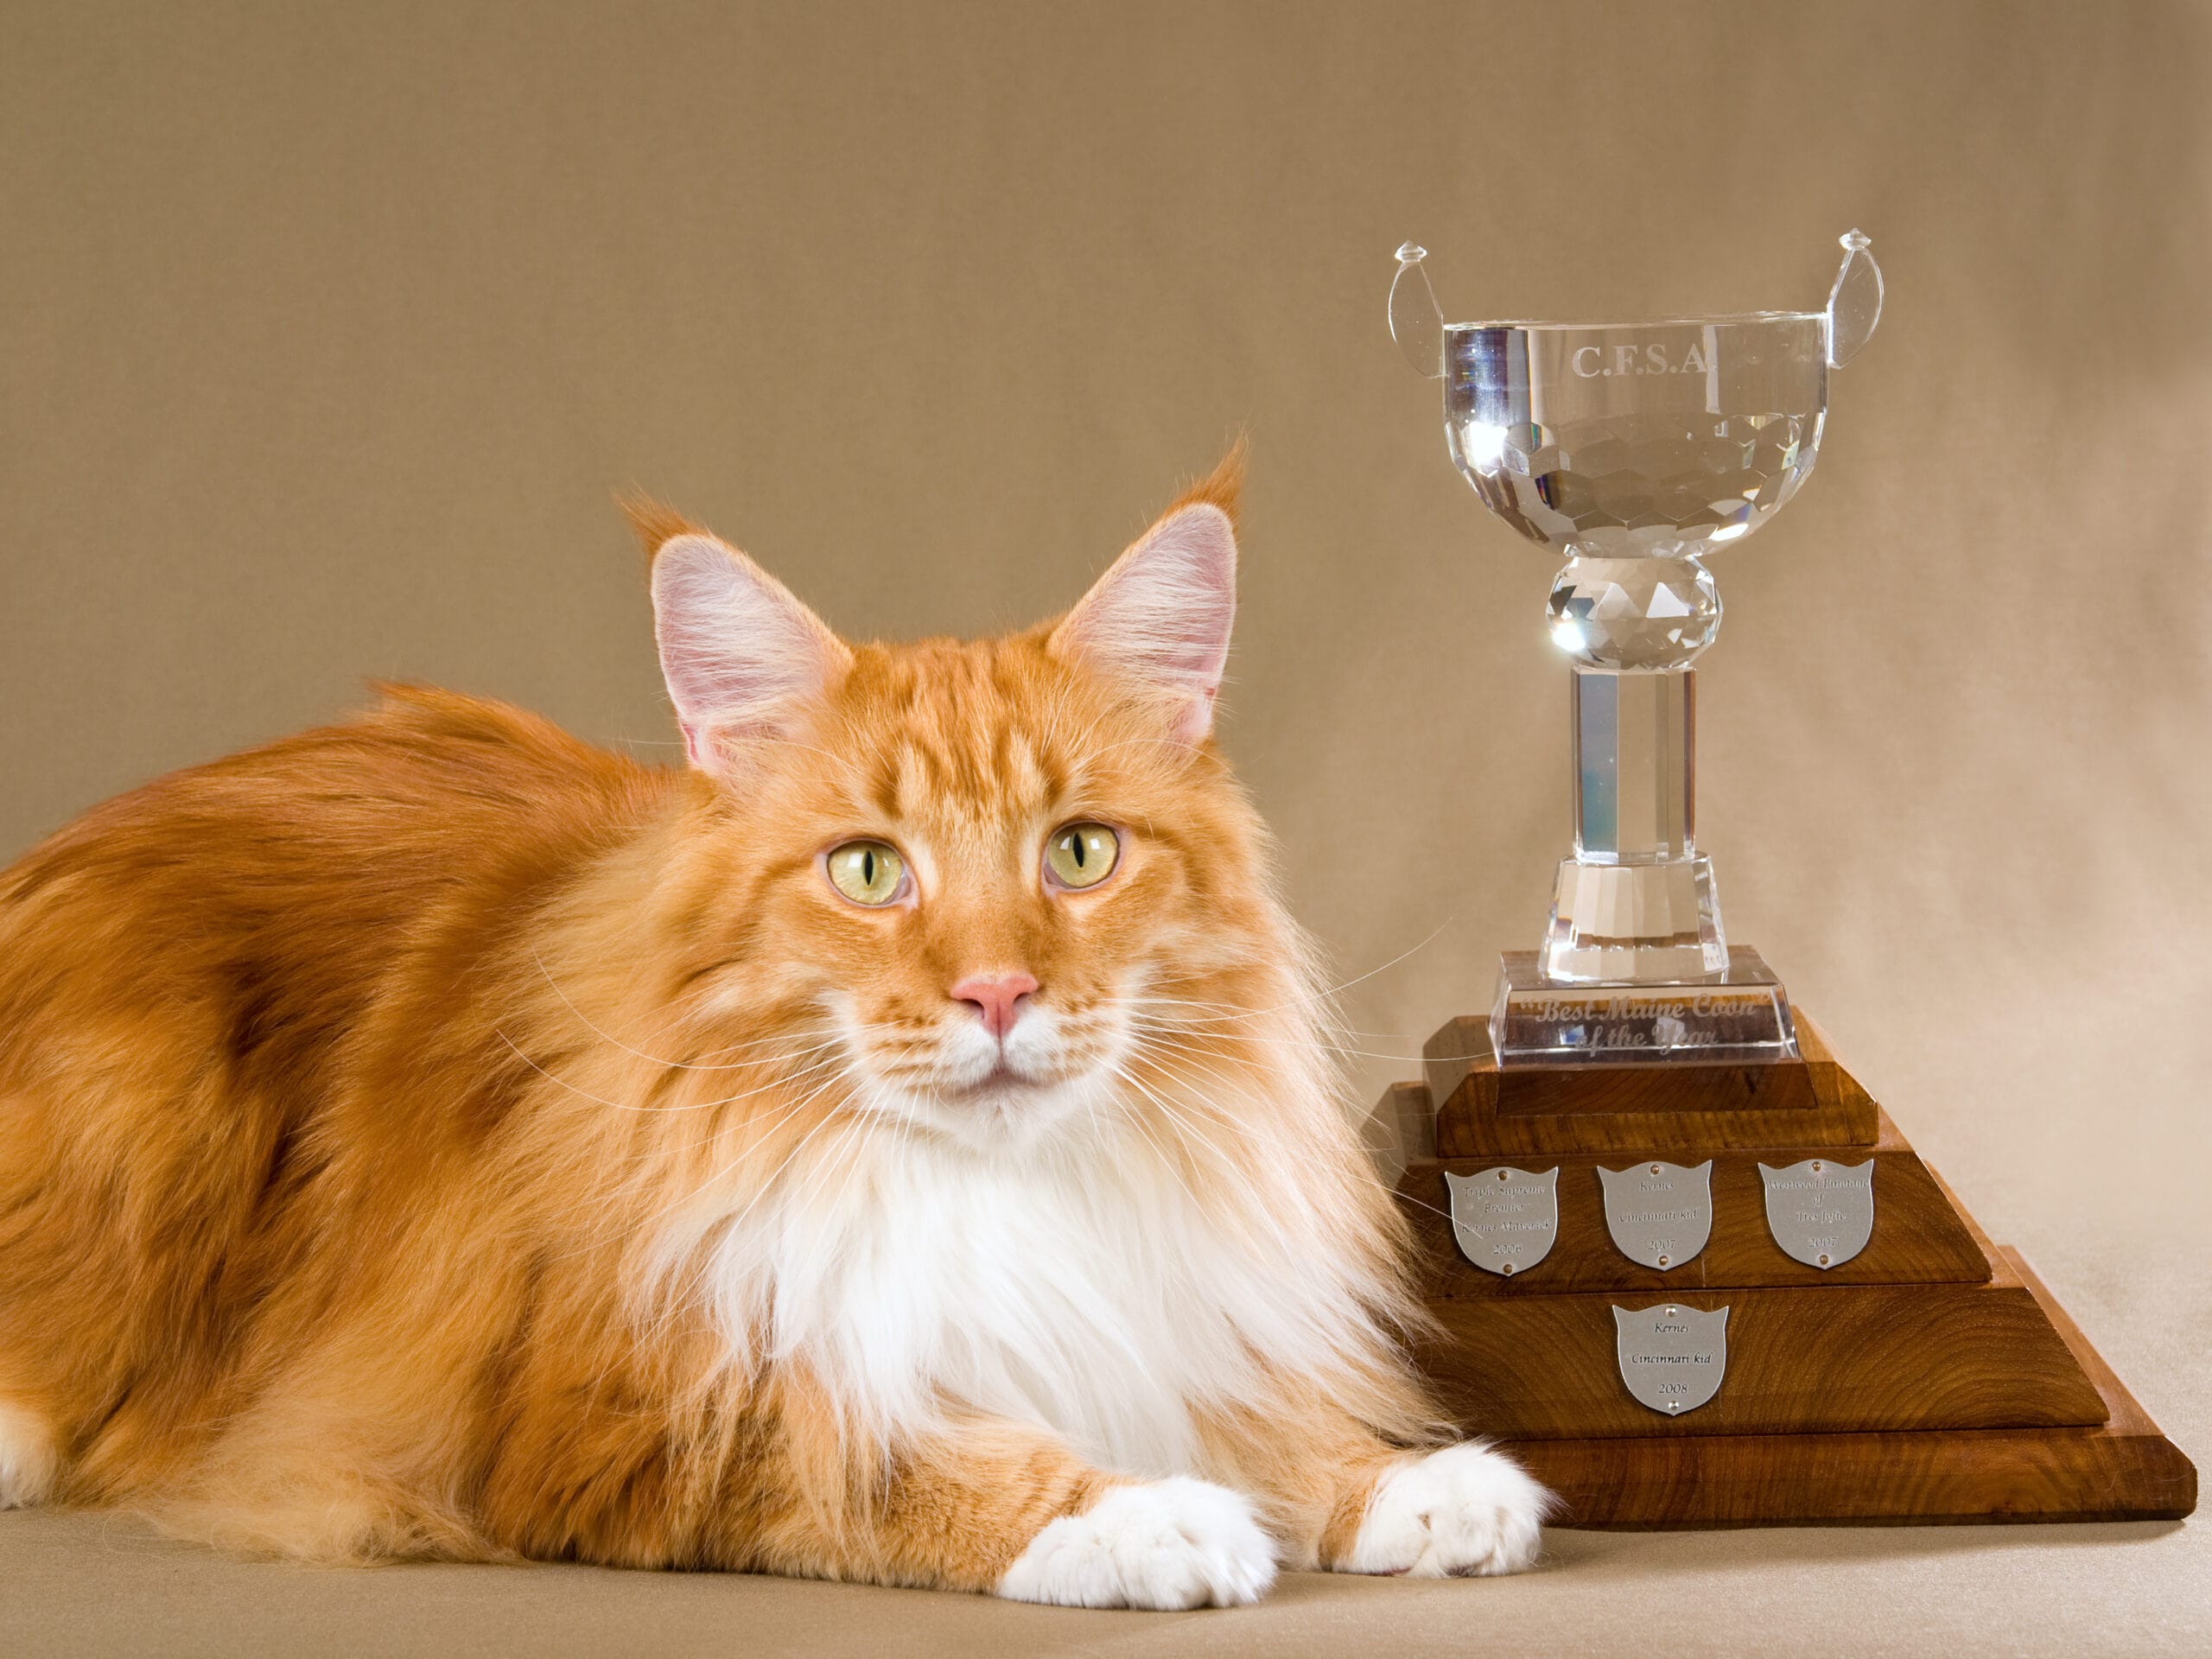 Champion Maine Coon Ginger Cat next to trophy